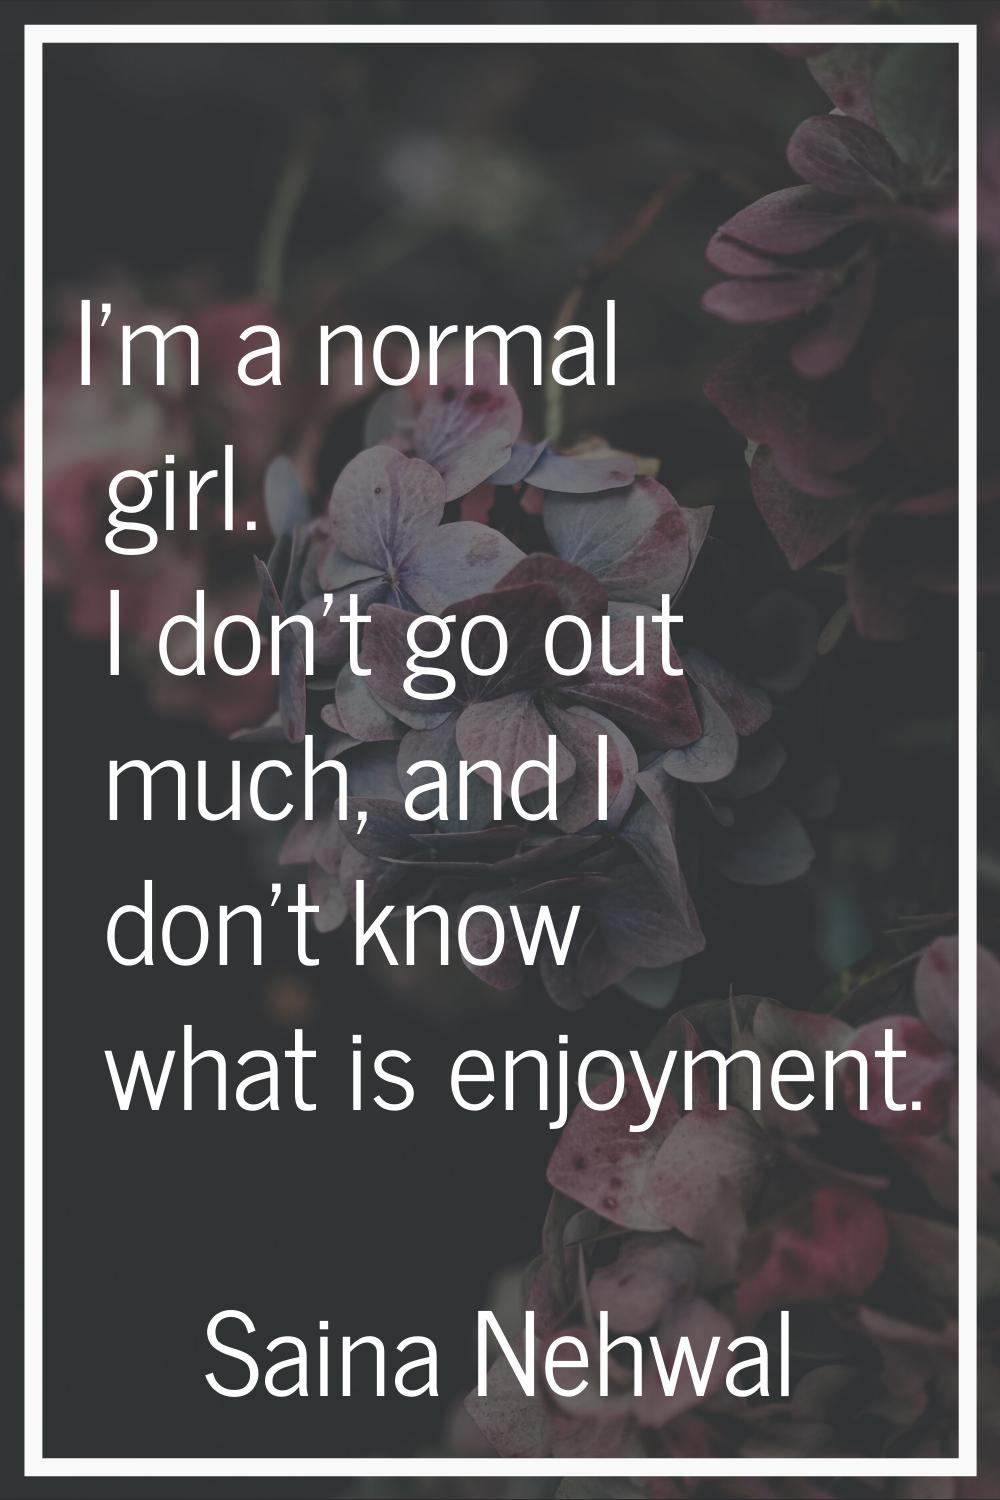 I'm a normal girl. I don't go out much, and I don't know what is enjoyment.